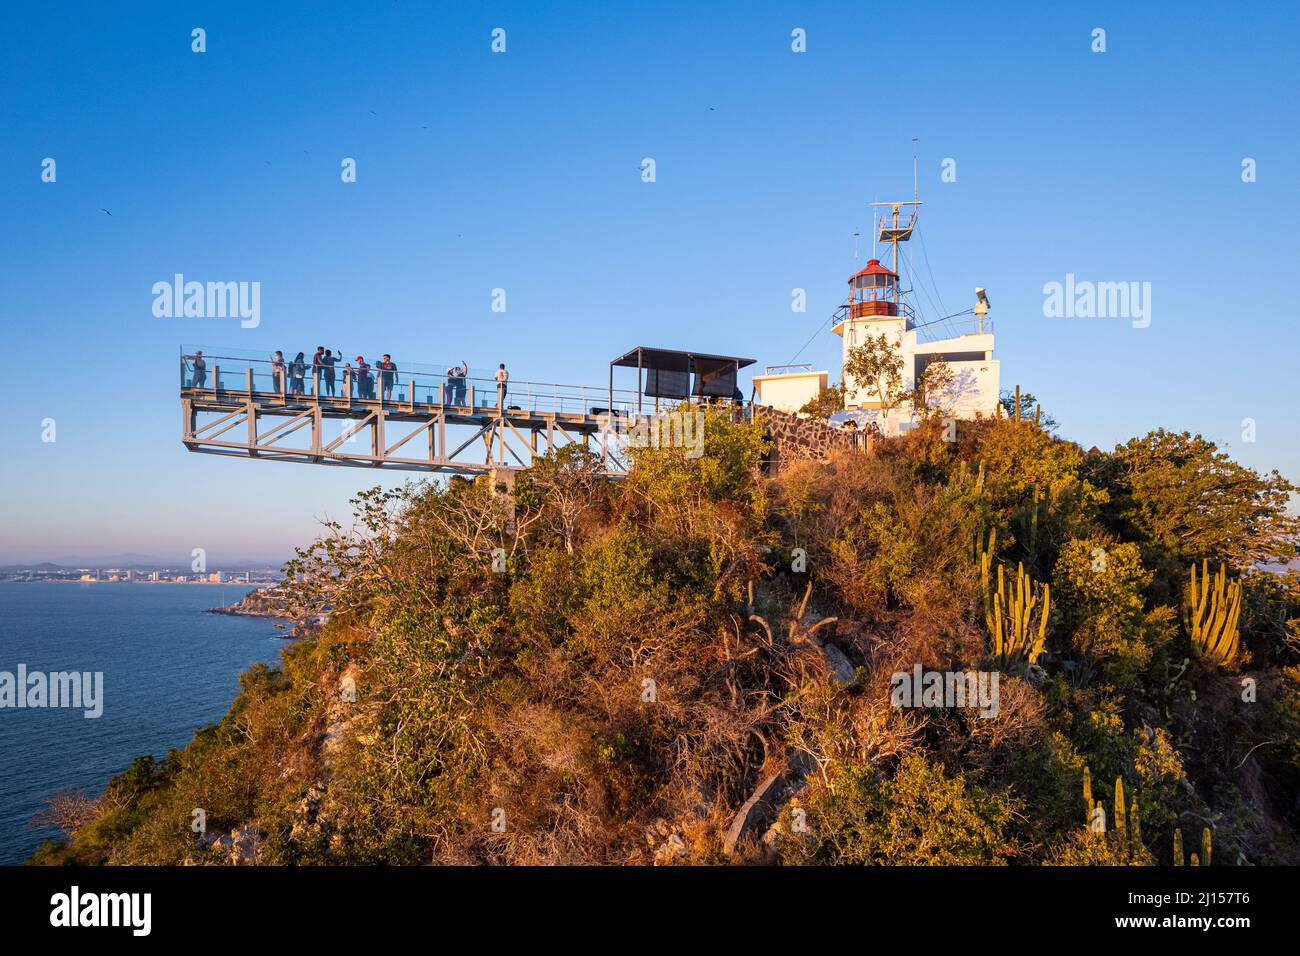 Lighthouse and skywalk in the Pacific resort city of Mazatlan, Sinaloa, Mexico. Stock Photo